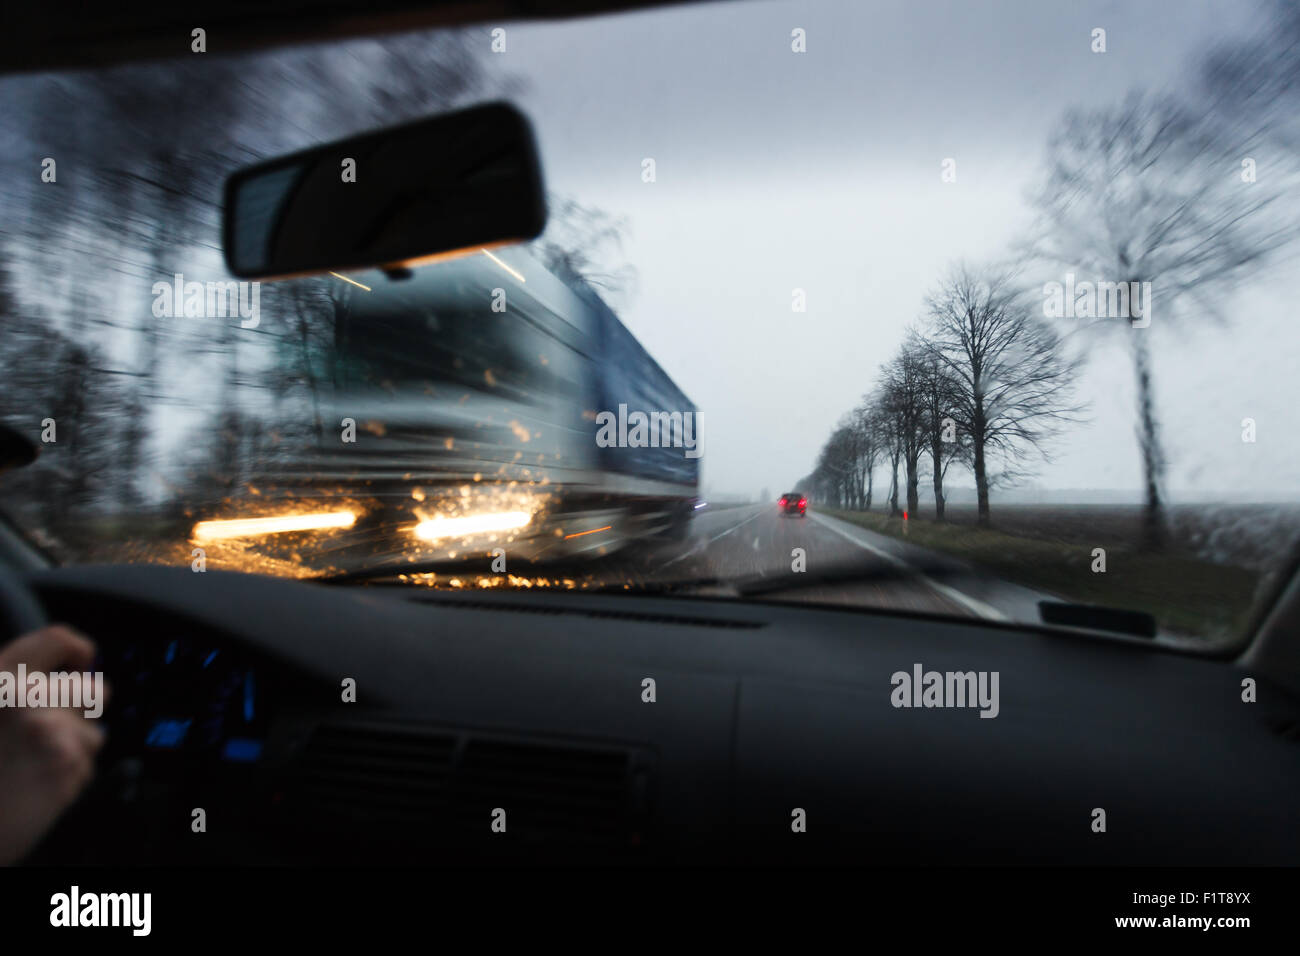 Bad weather conditions driving a car, passing truck Stock Photo